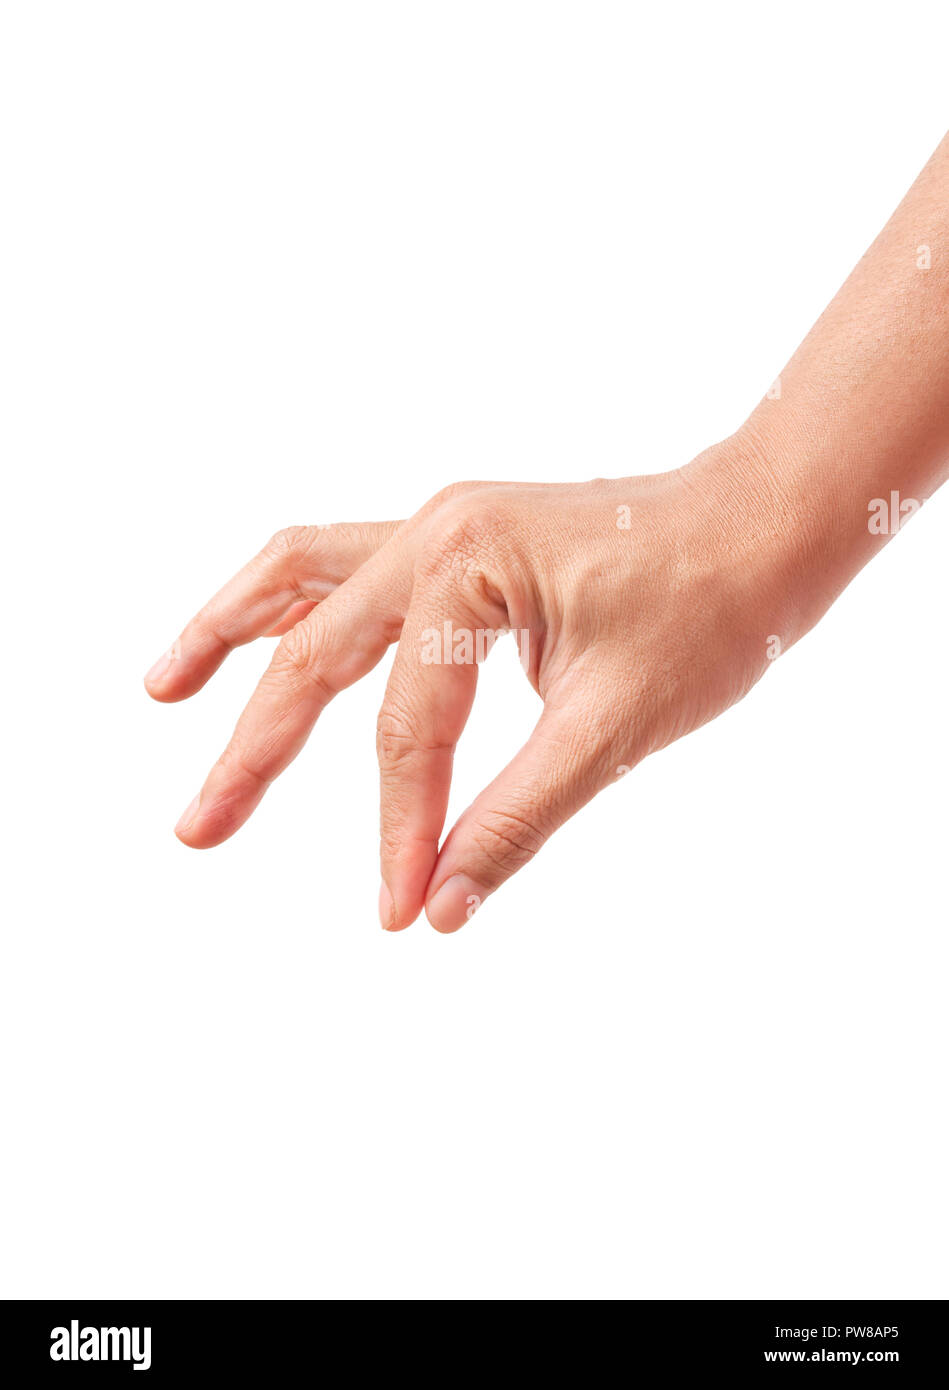 Hand of picking up something isolated on white background, Save clipping path. Stock Photo